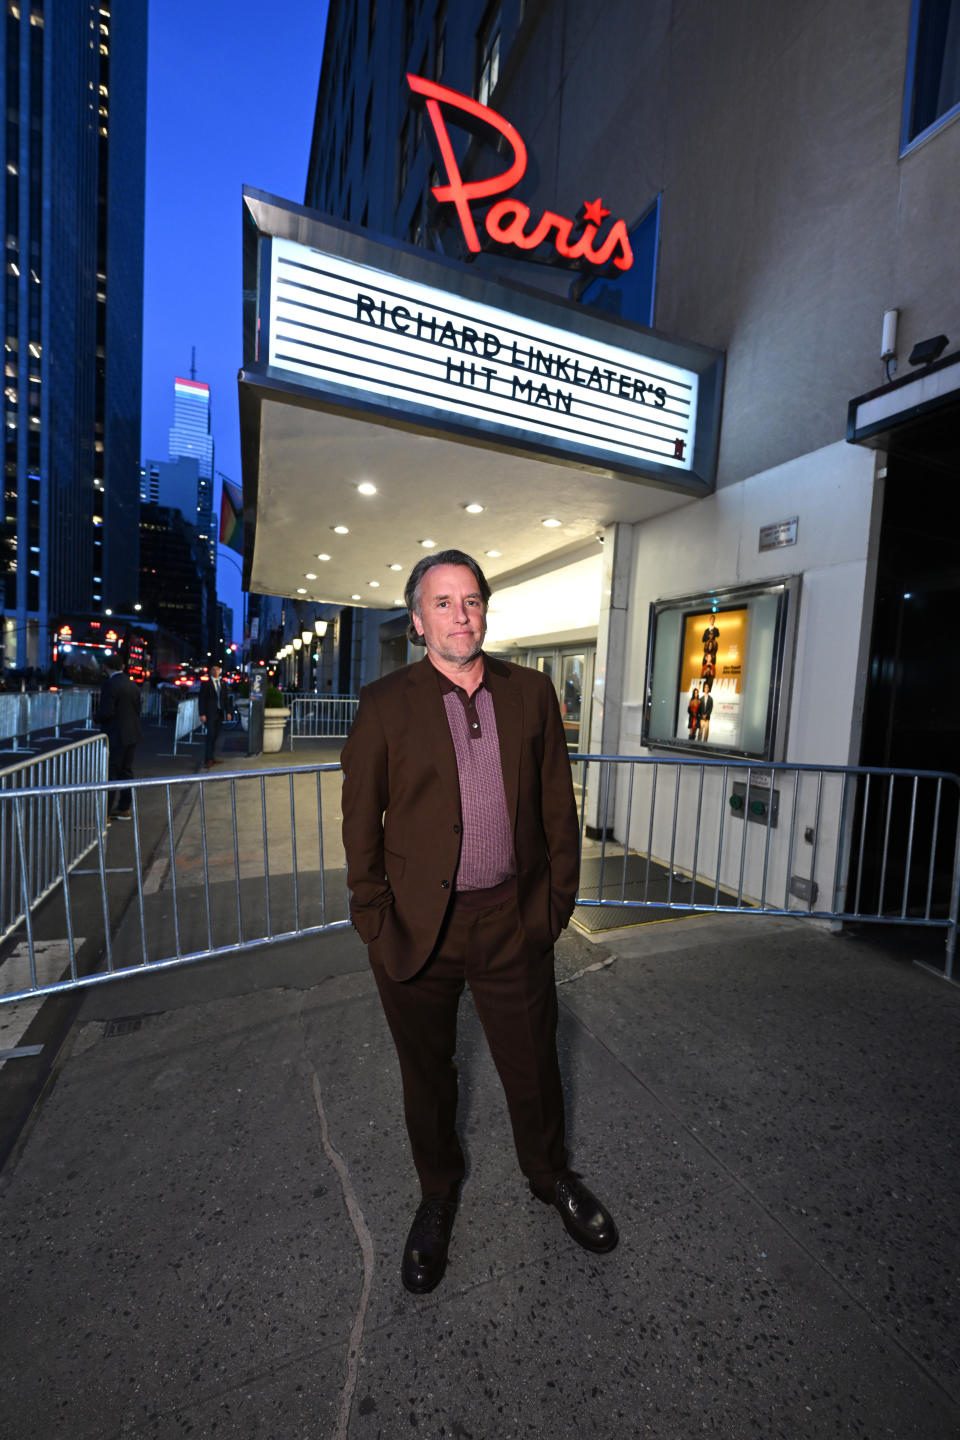 Richard Linklater in a brown suit stands outside a theater displaying a marquee that reads "Richard Linklater's Hit Man." City buildings and a lit sign in the background